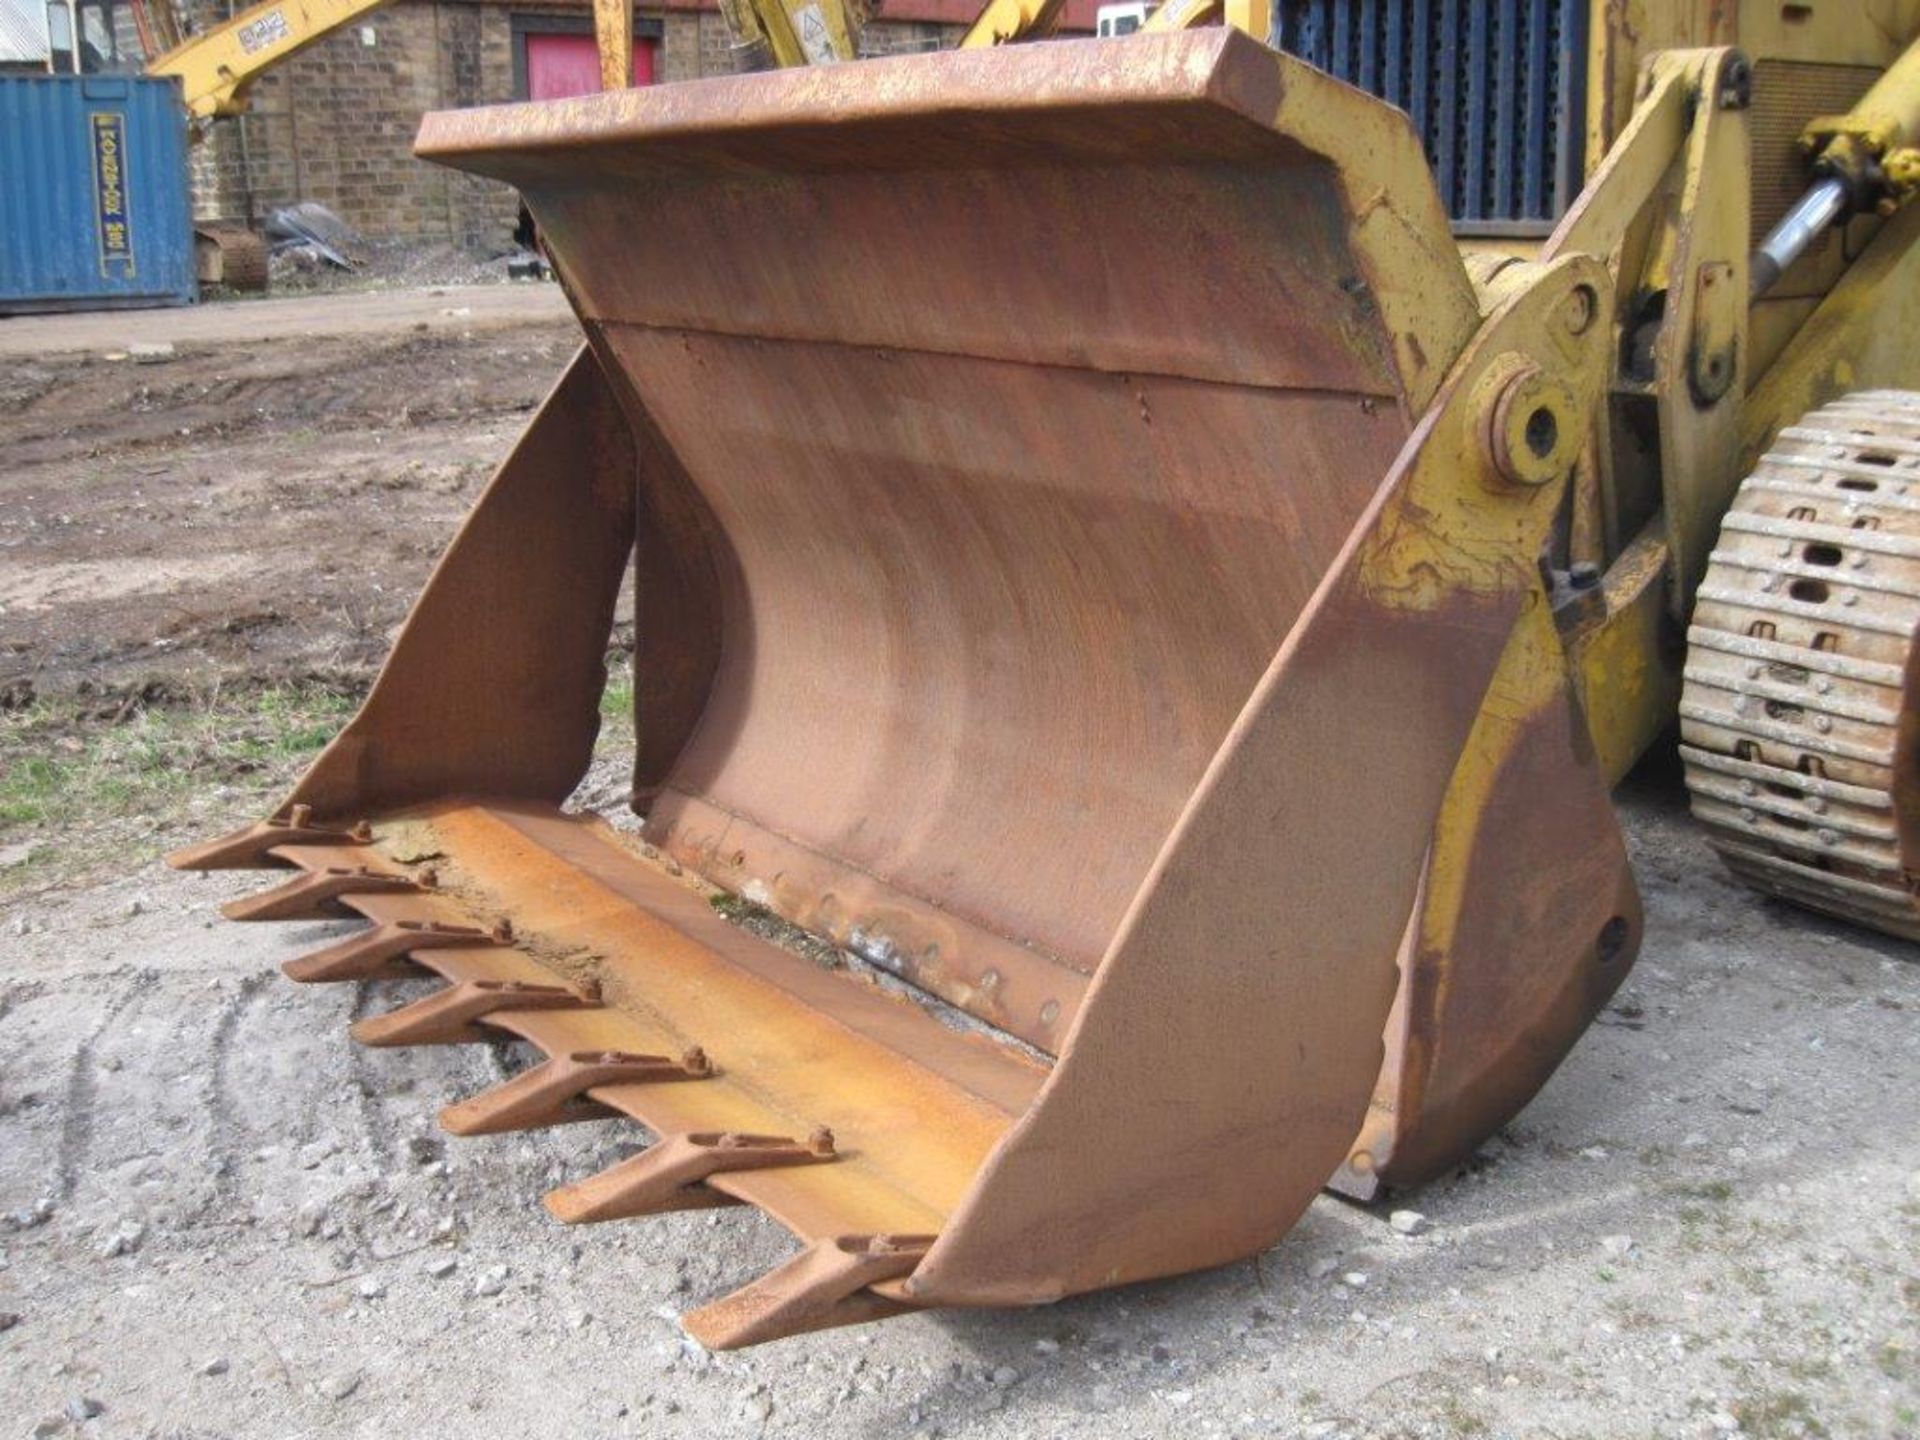 Komatsu Tracked Loading Shovel_x00D_
Good condition for age, 4 in 1 bucket with teeth and good - Image 5 of 6